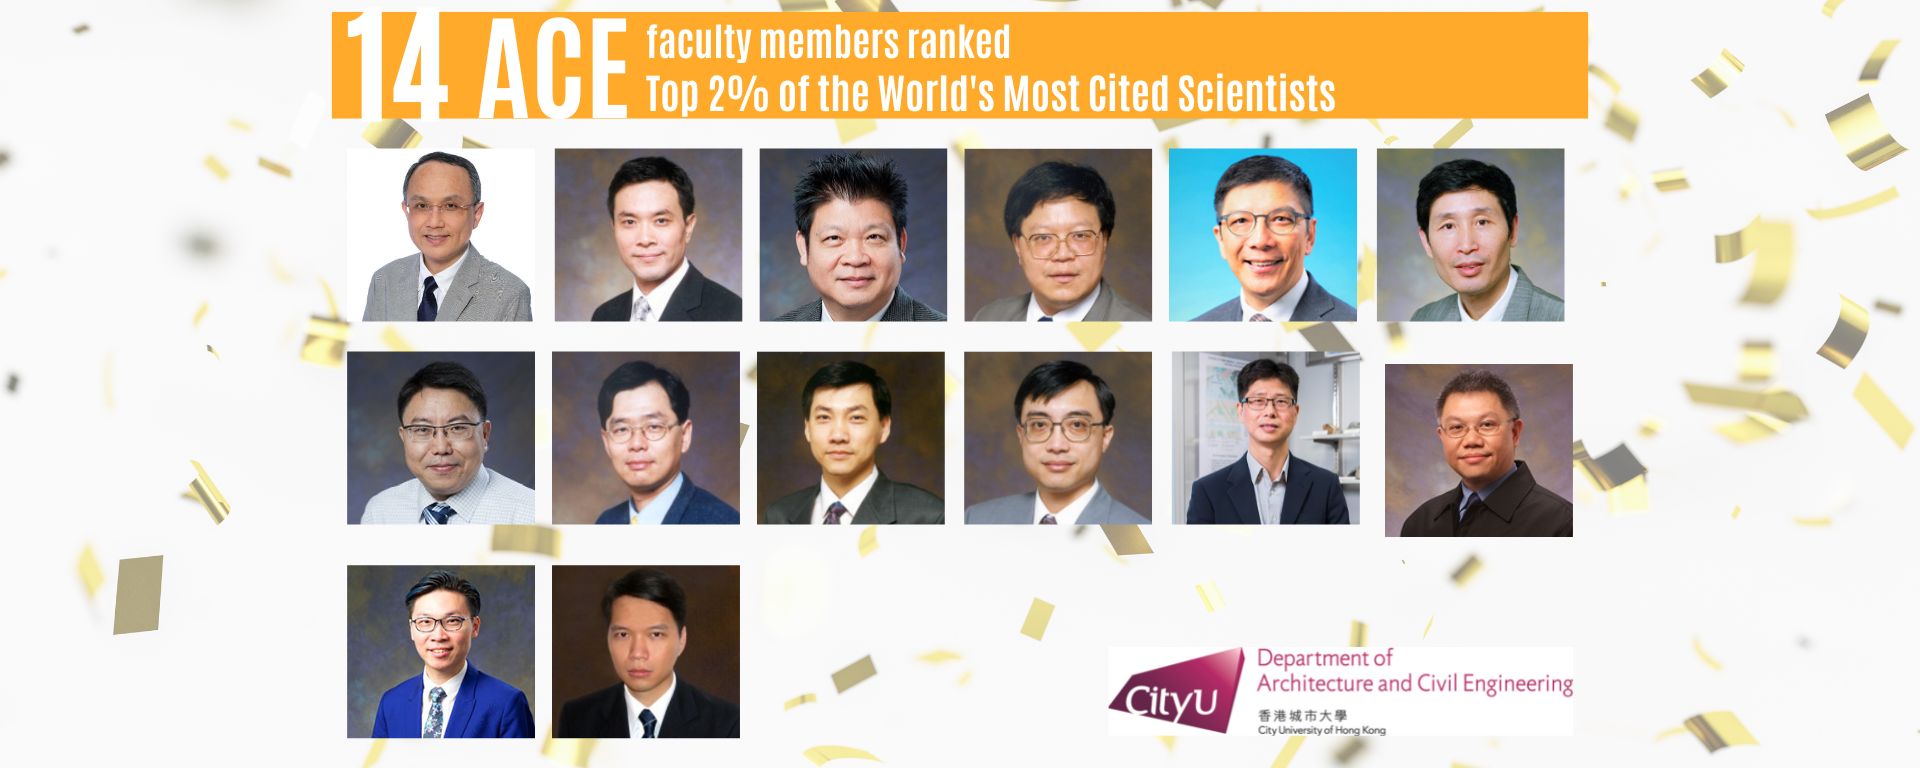 Top 2% of the World's Most Cited Scientists